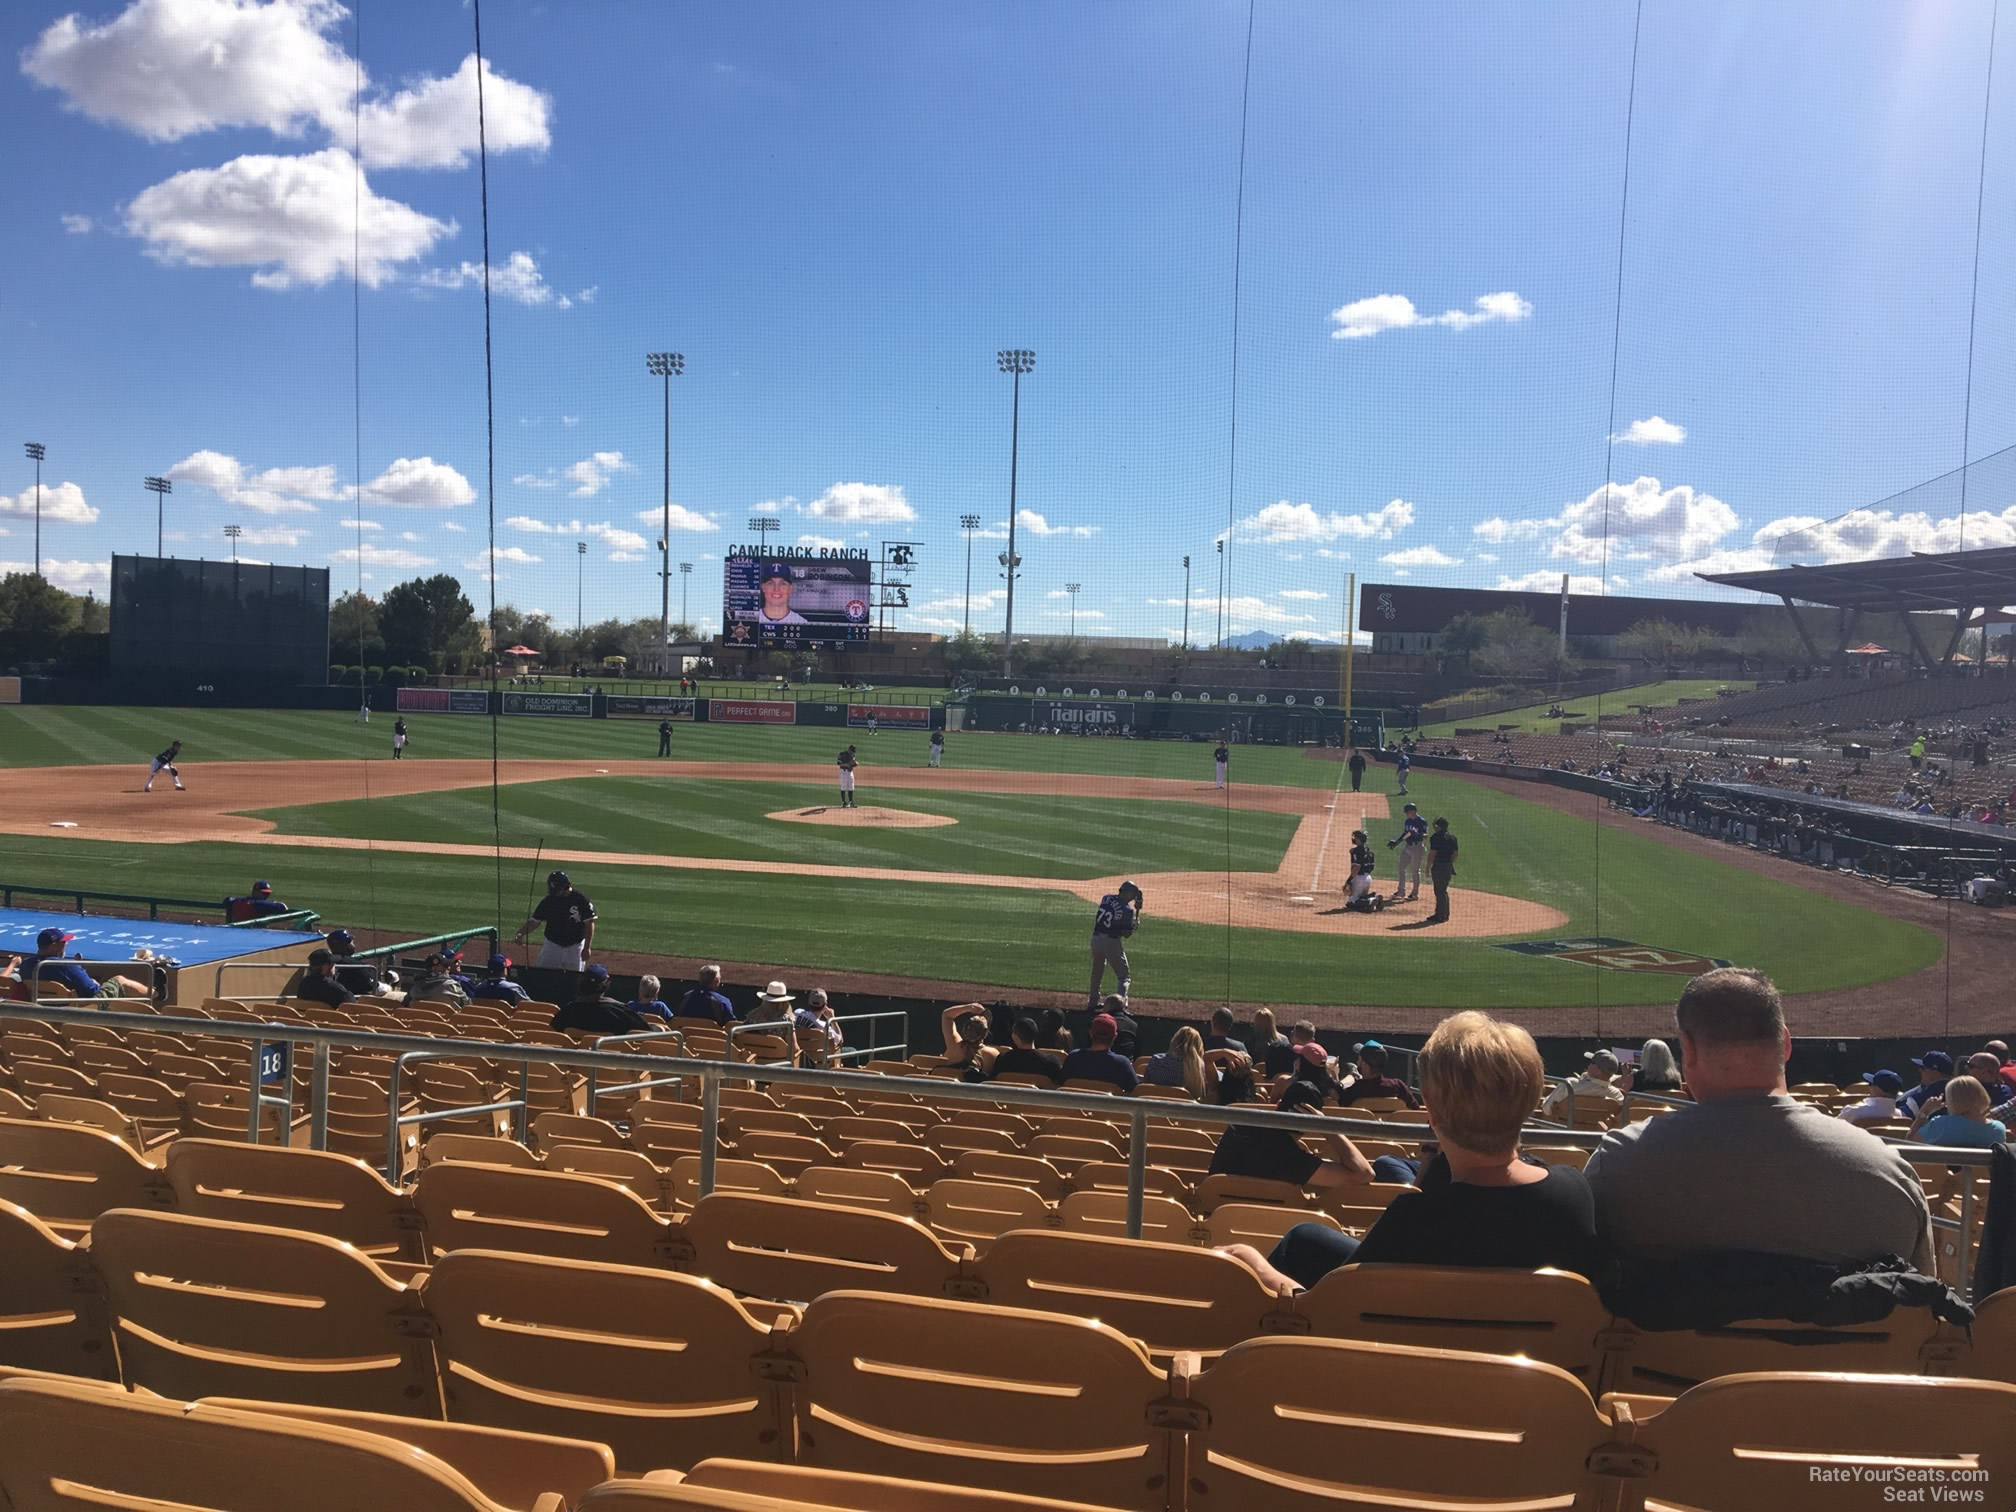 section 118, row 5 seat view  - camelback ranch